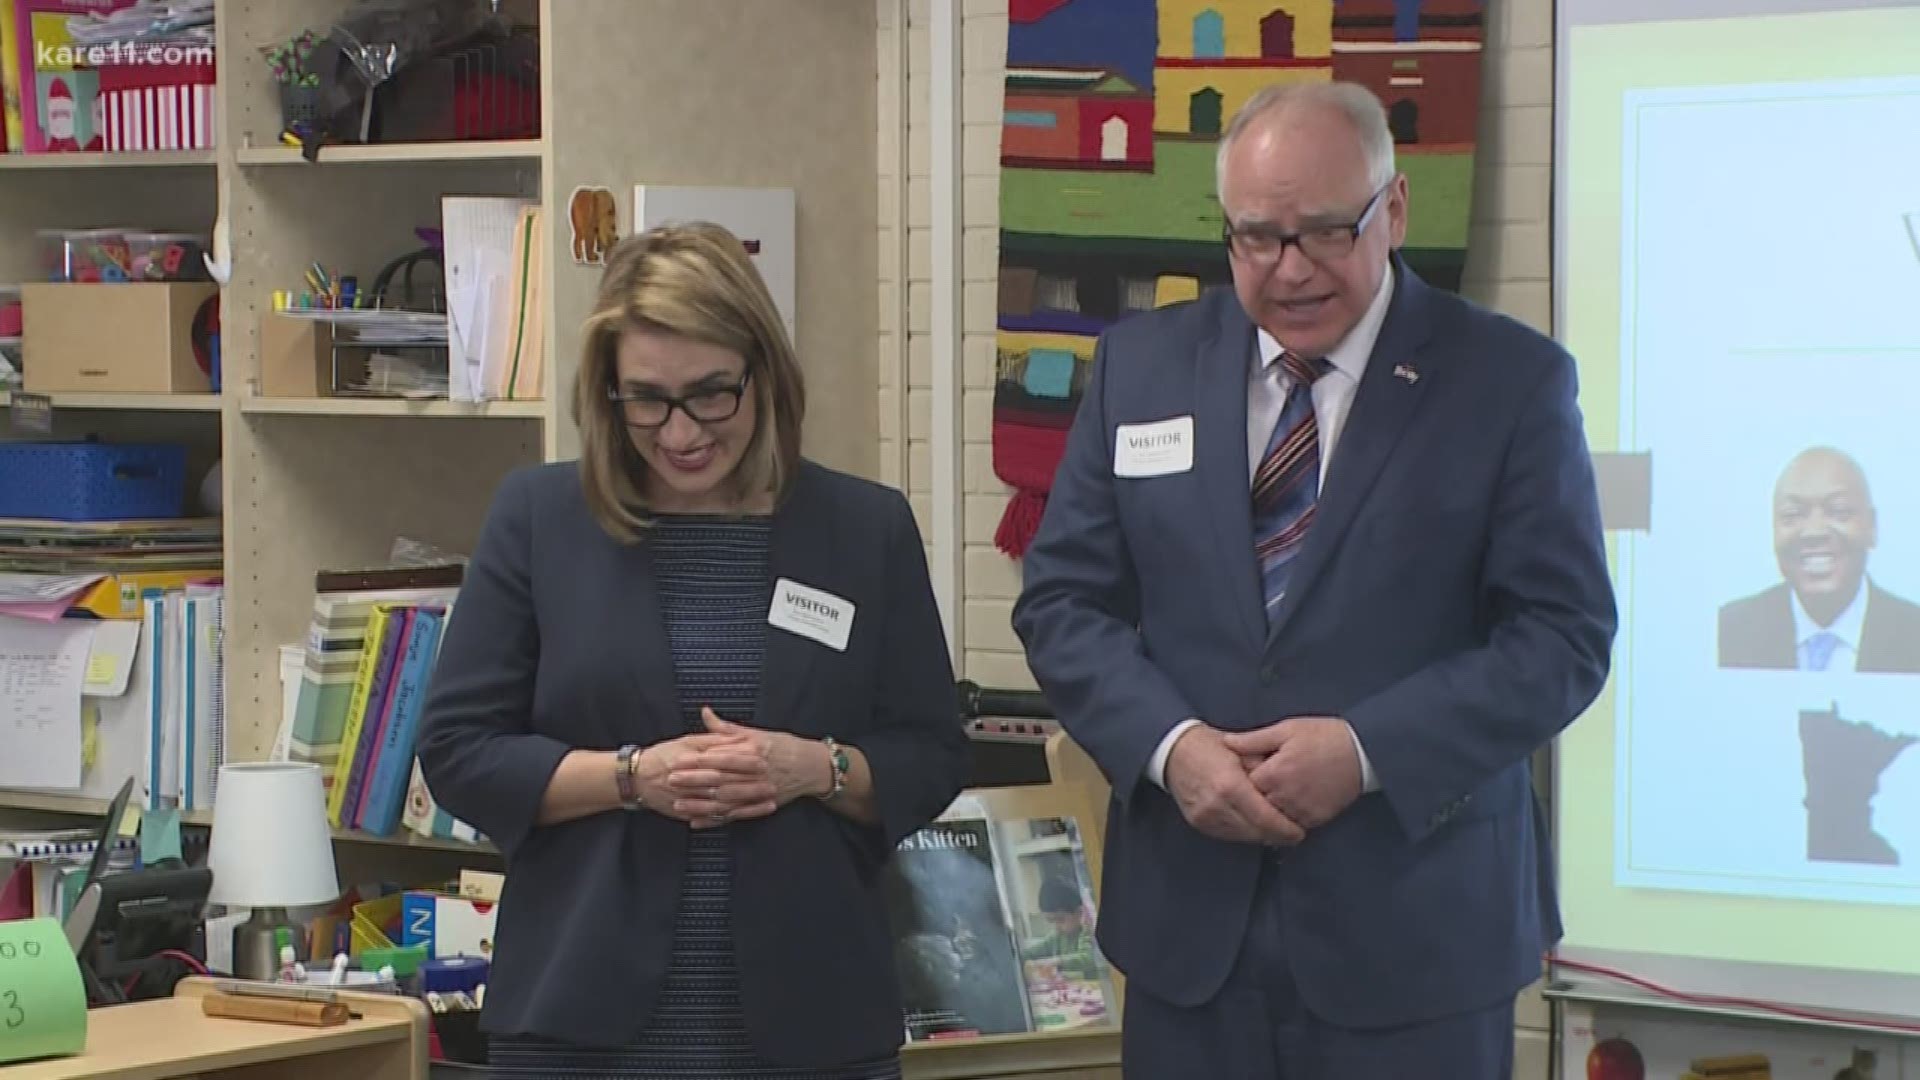 Governor Tim Walz has been to every corner of Minnesota promoting his school funding plan, with stops in 11 different cities. As he wrapped up the tour Tuesday, he conceded the plan will be a hard sell at the capitol.